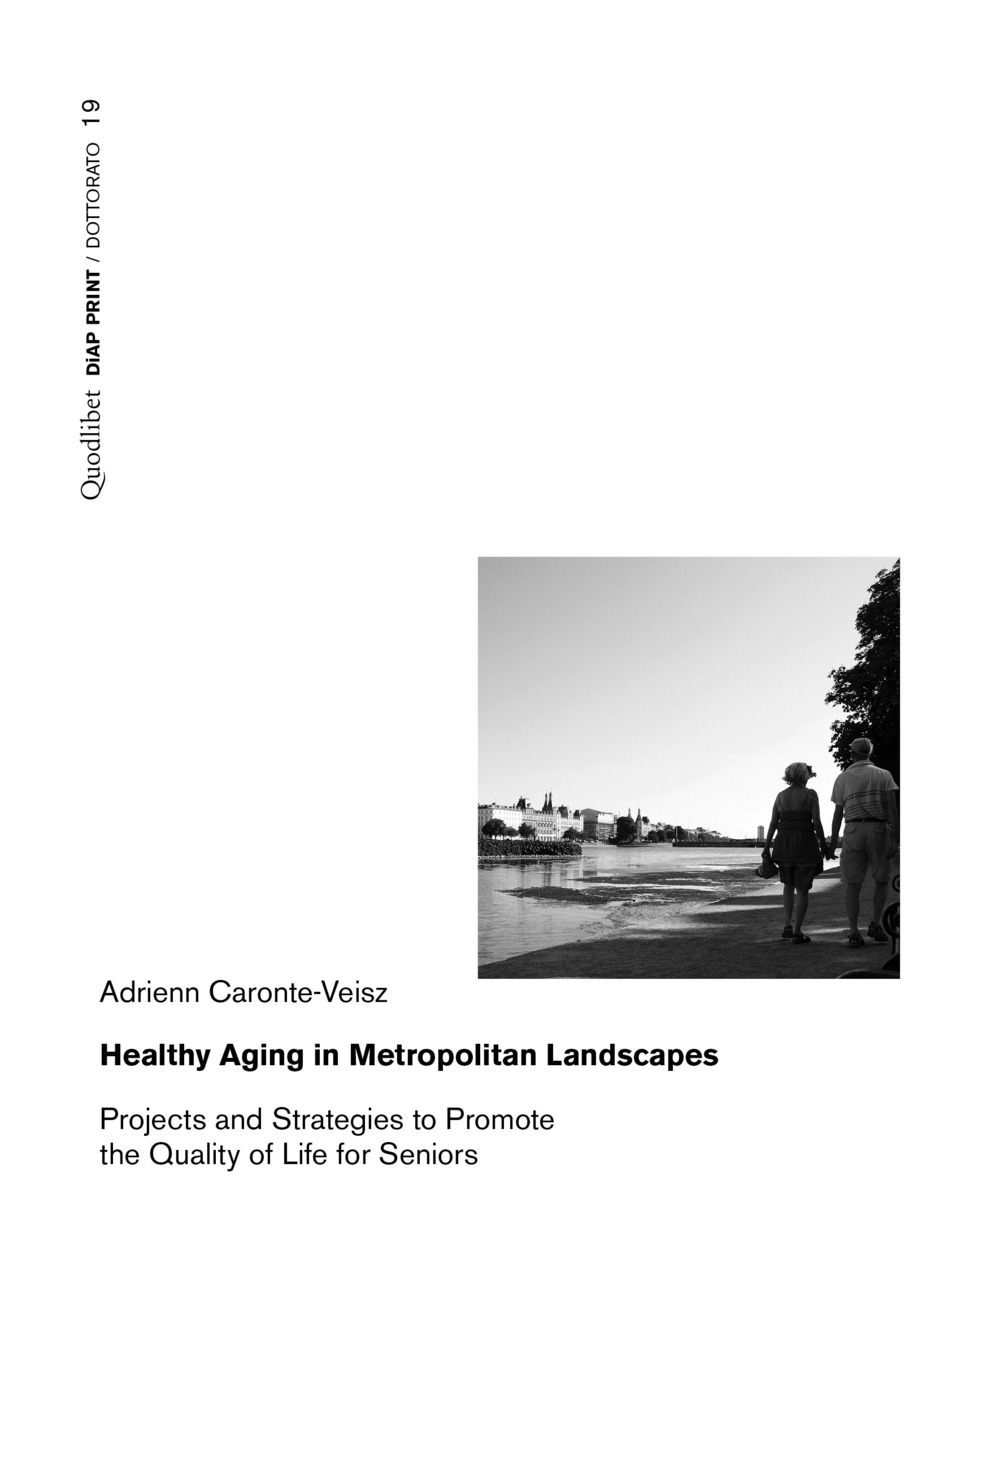 HEALTHY AGING IN METROPOLITAN LANDSCAPES. PROJECTS AND STRATEGIES TO PROMOTE THE QUALITY OF LIFE FOR SENIORS - 9788822906038